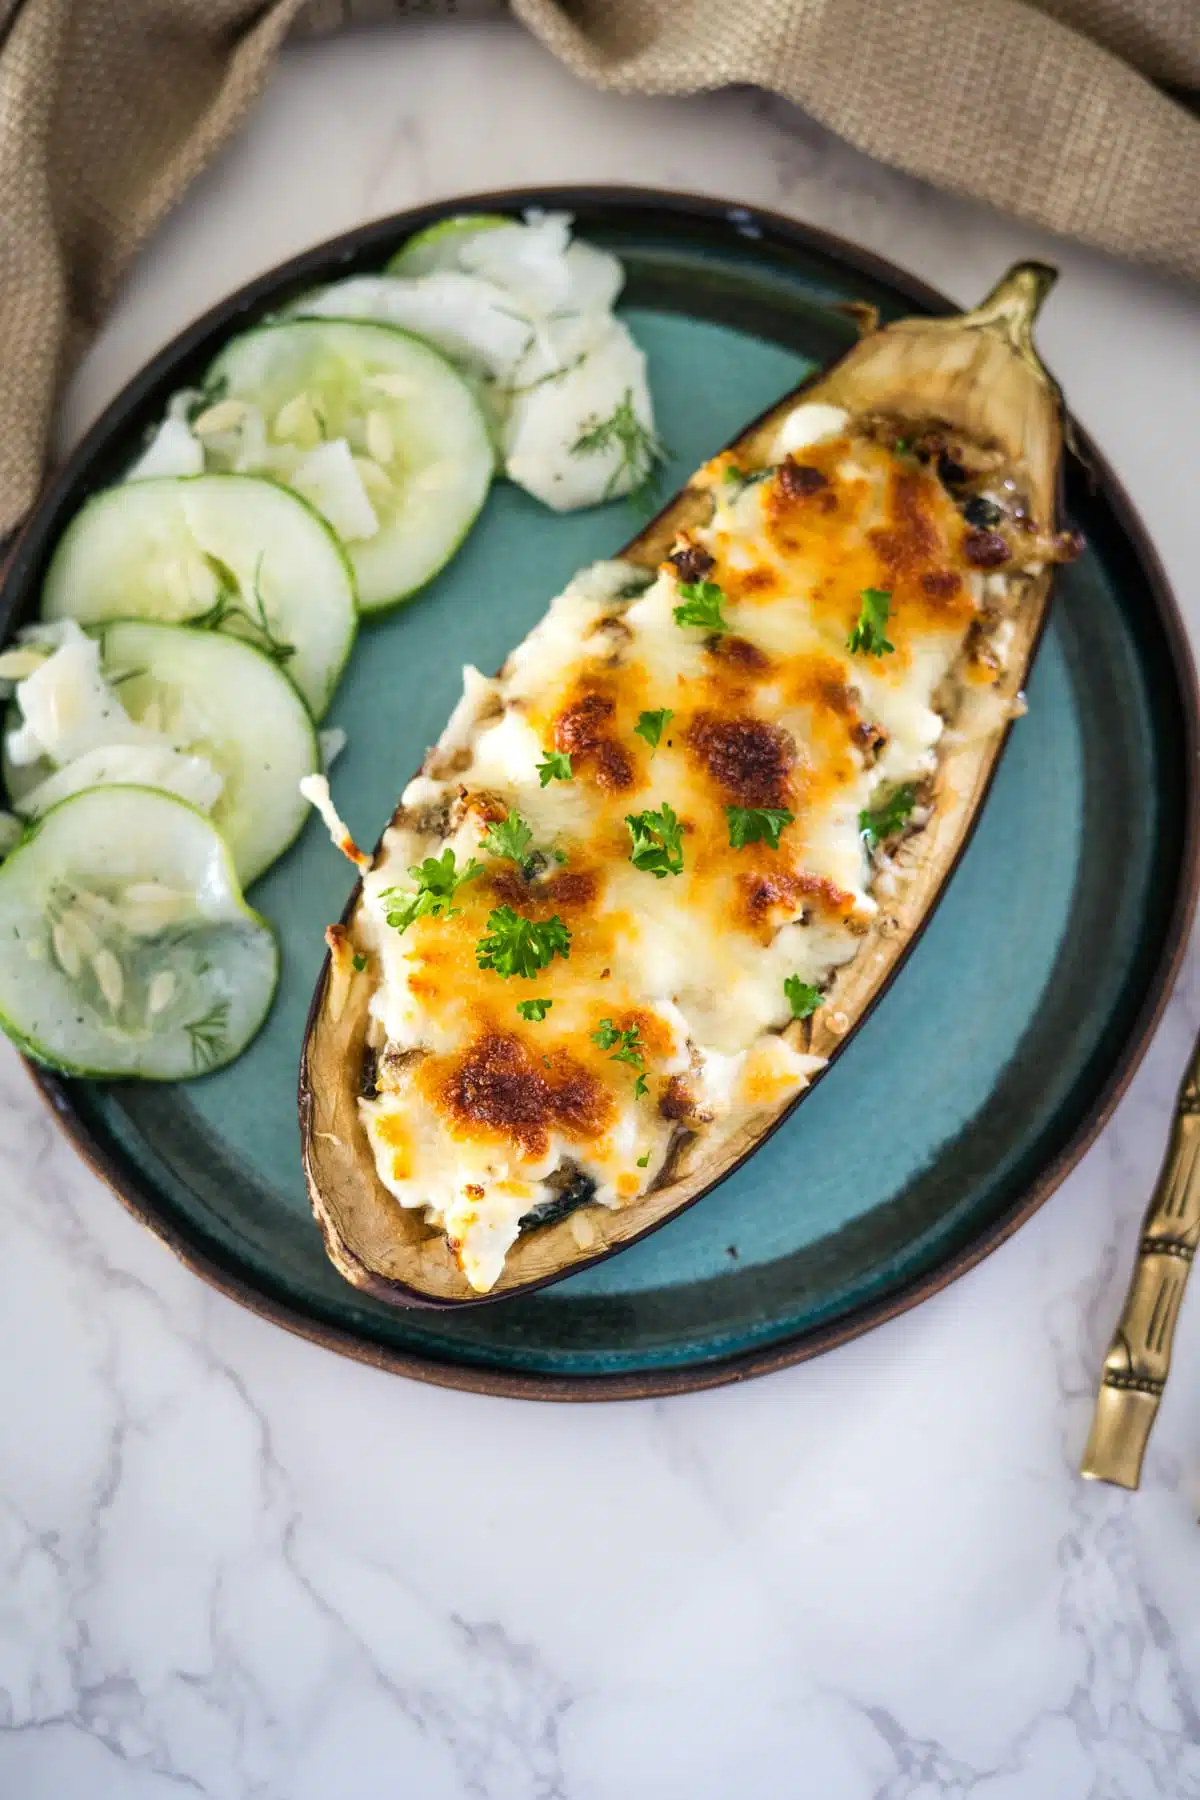 Stuffed eggplant with feta cheese and cucumbers on a plate.